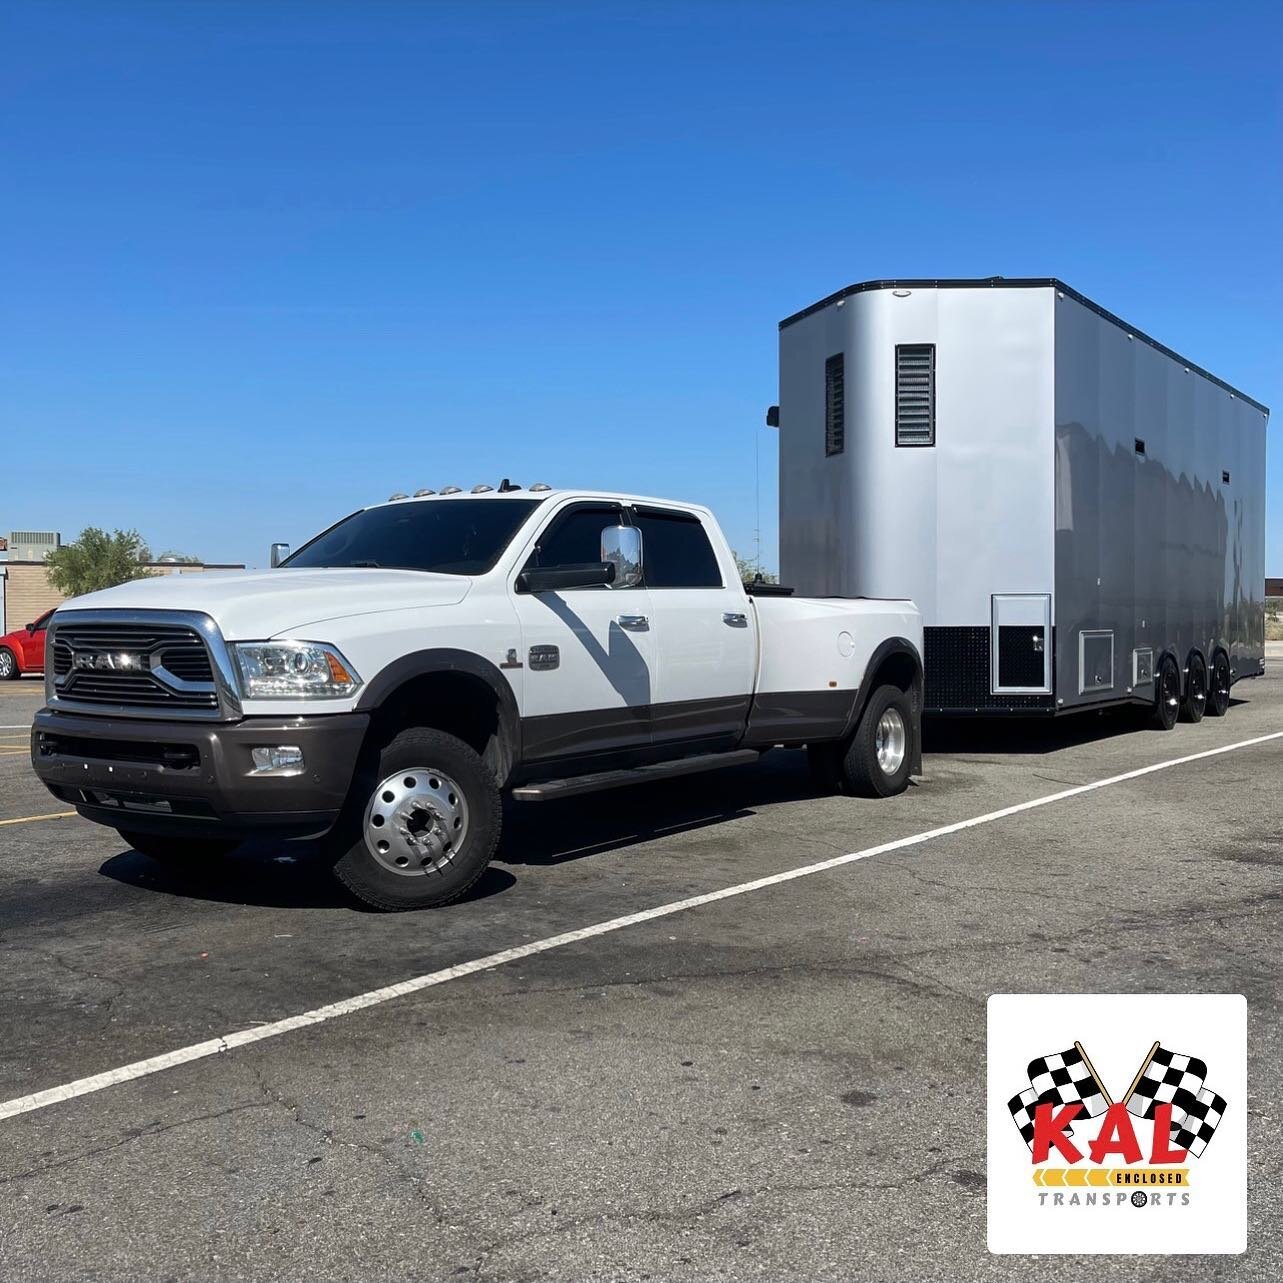 Club Sandcar headed to glamis for staging..

if your looking for #PowerOnly to get your setup to the dunes for glamis? We got you!
&bull;
&bull;
&bull; #CallKal 330-701-6803
&bull;
&bull;
&bull;
#reels #explorepage #glamis #glamisdunes #glamissanddun